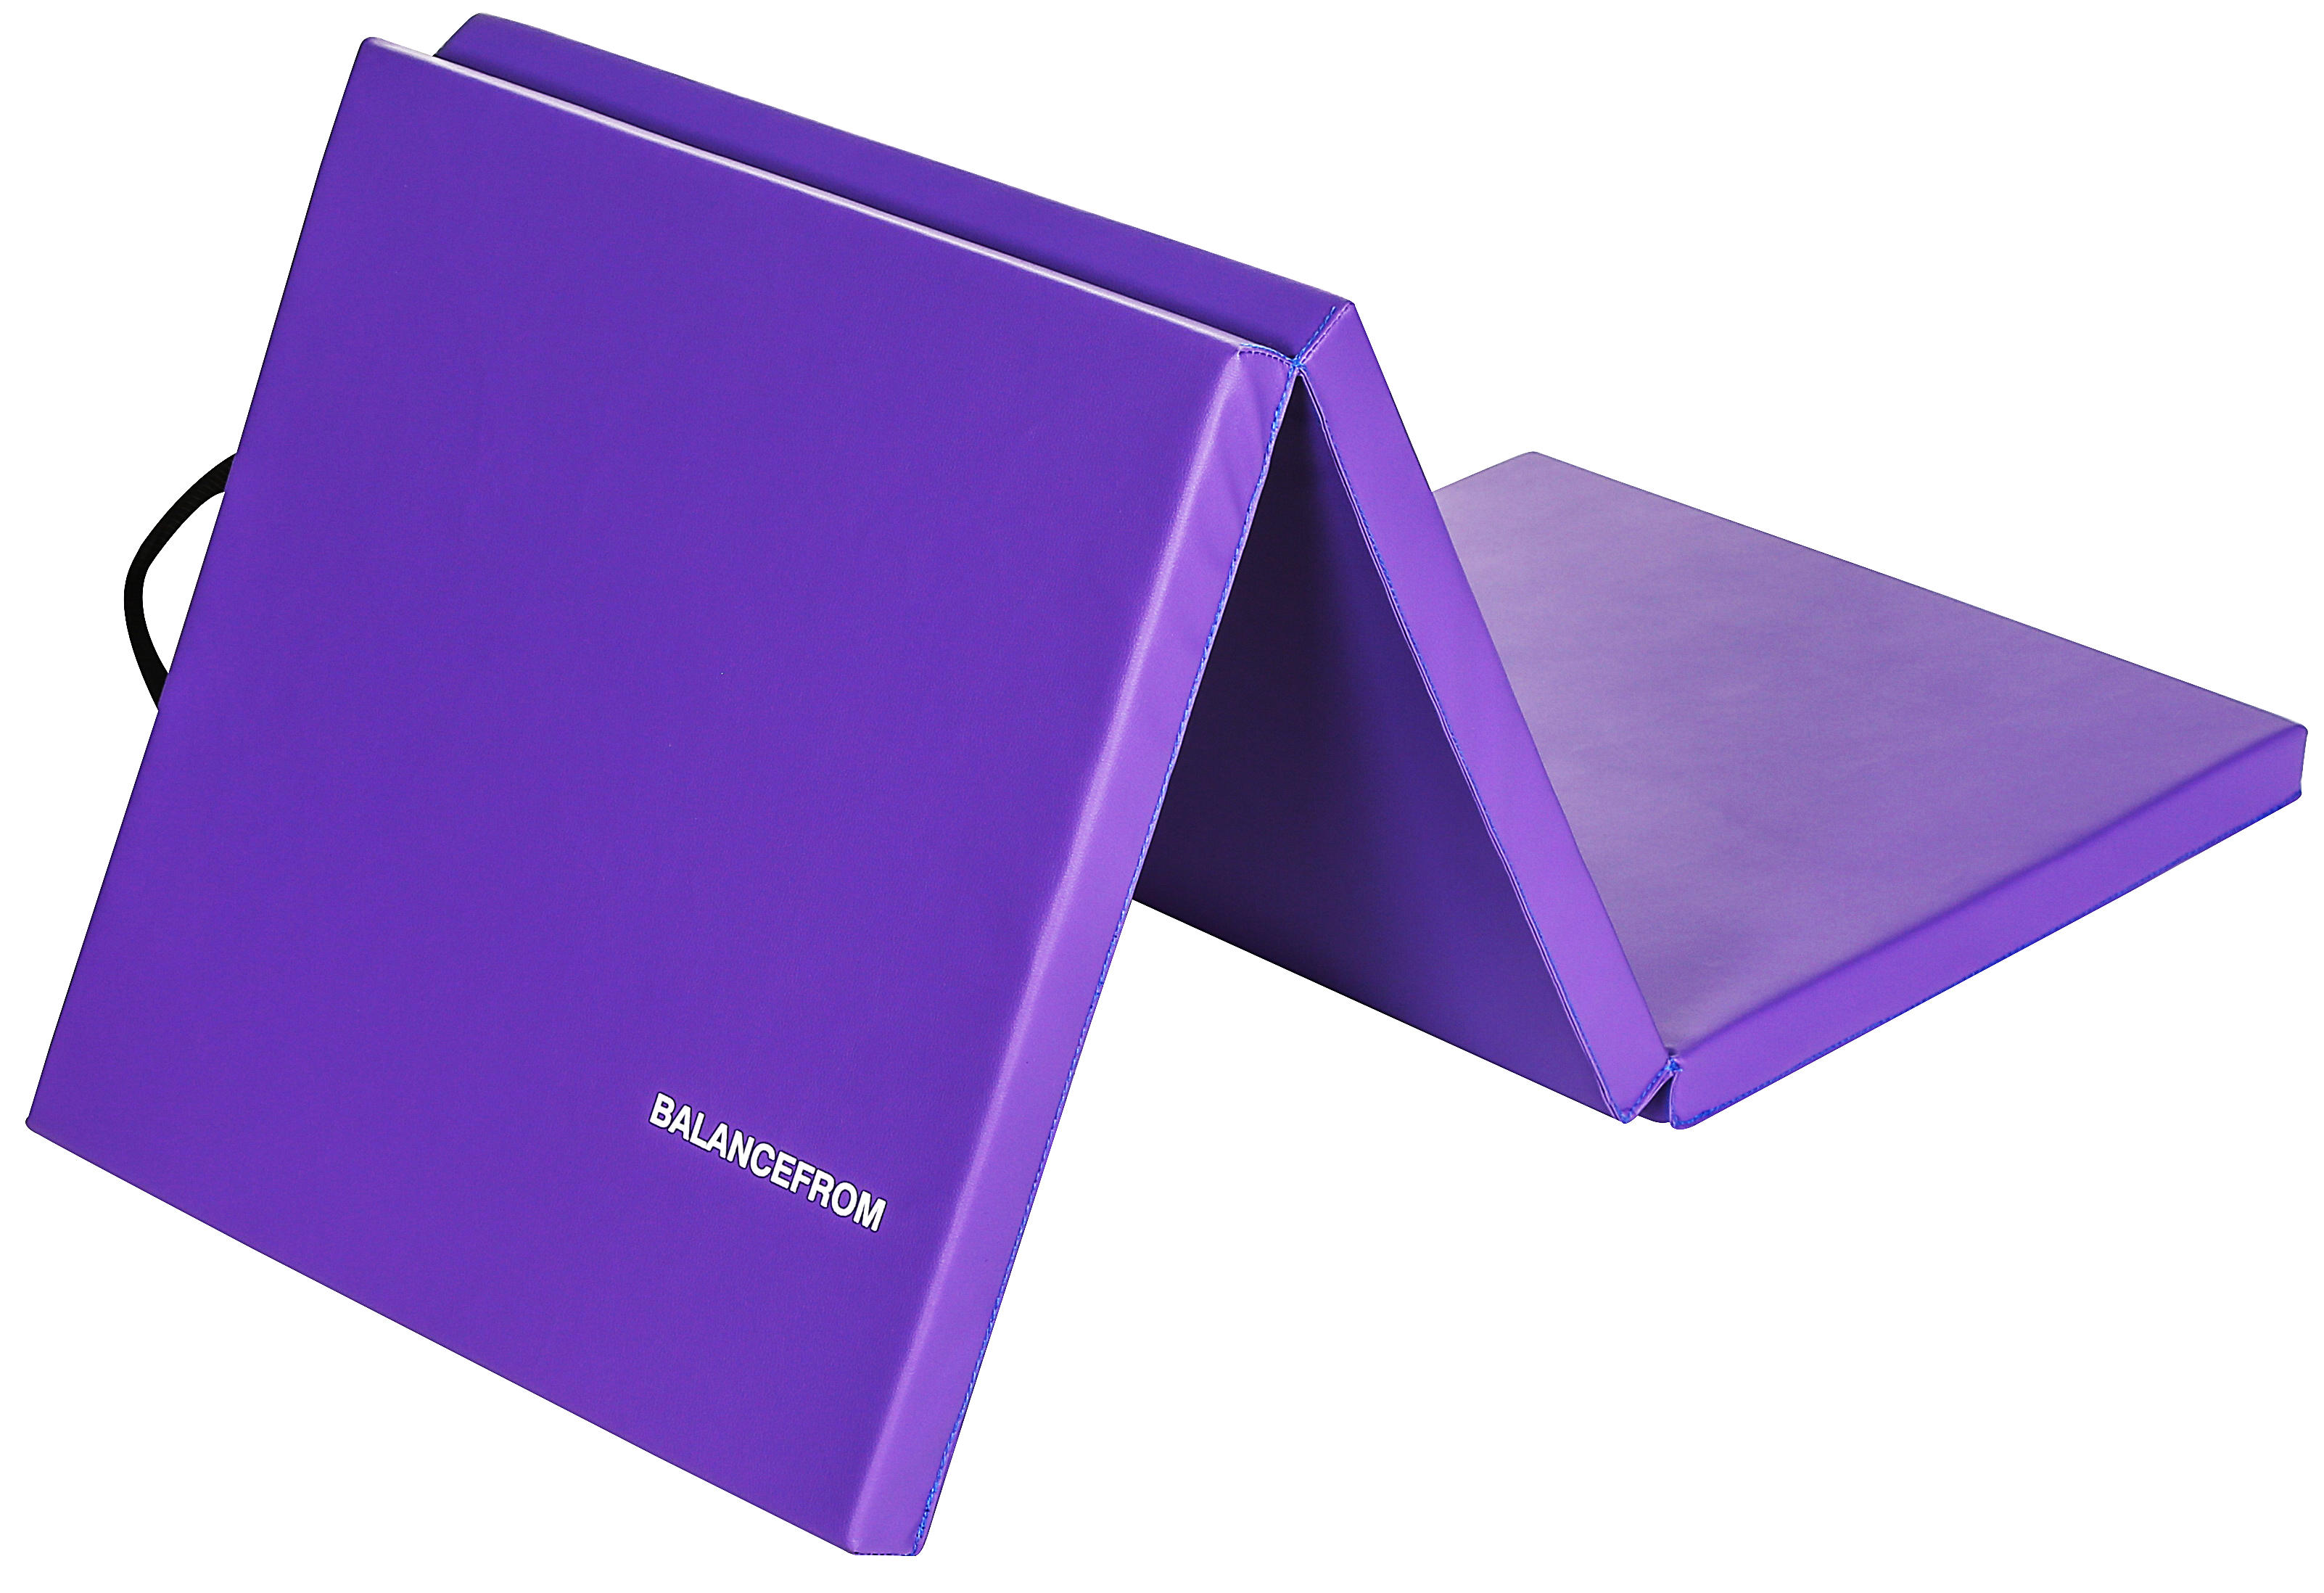 BalanceFrom 6 Ft. x 2 Ft. x 2 In. Three Fold Folding Exercise Mat with Carrying Handles for MMA, Gymnastics and Home Gym, Purple - image 1 of 6